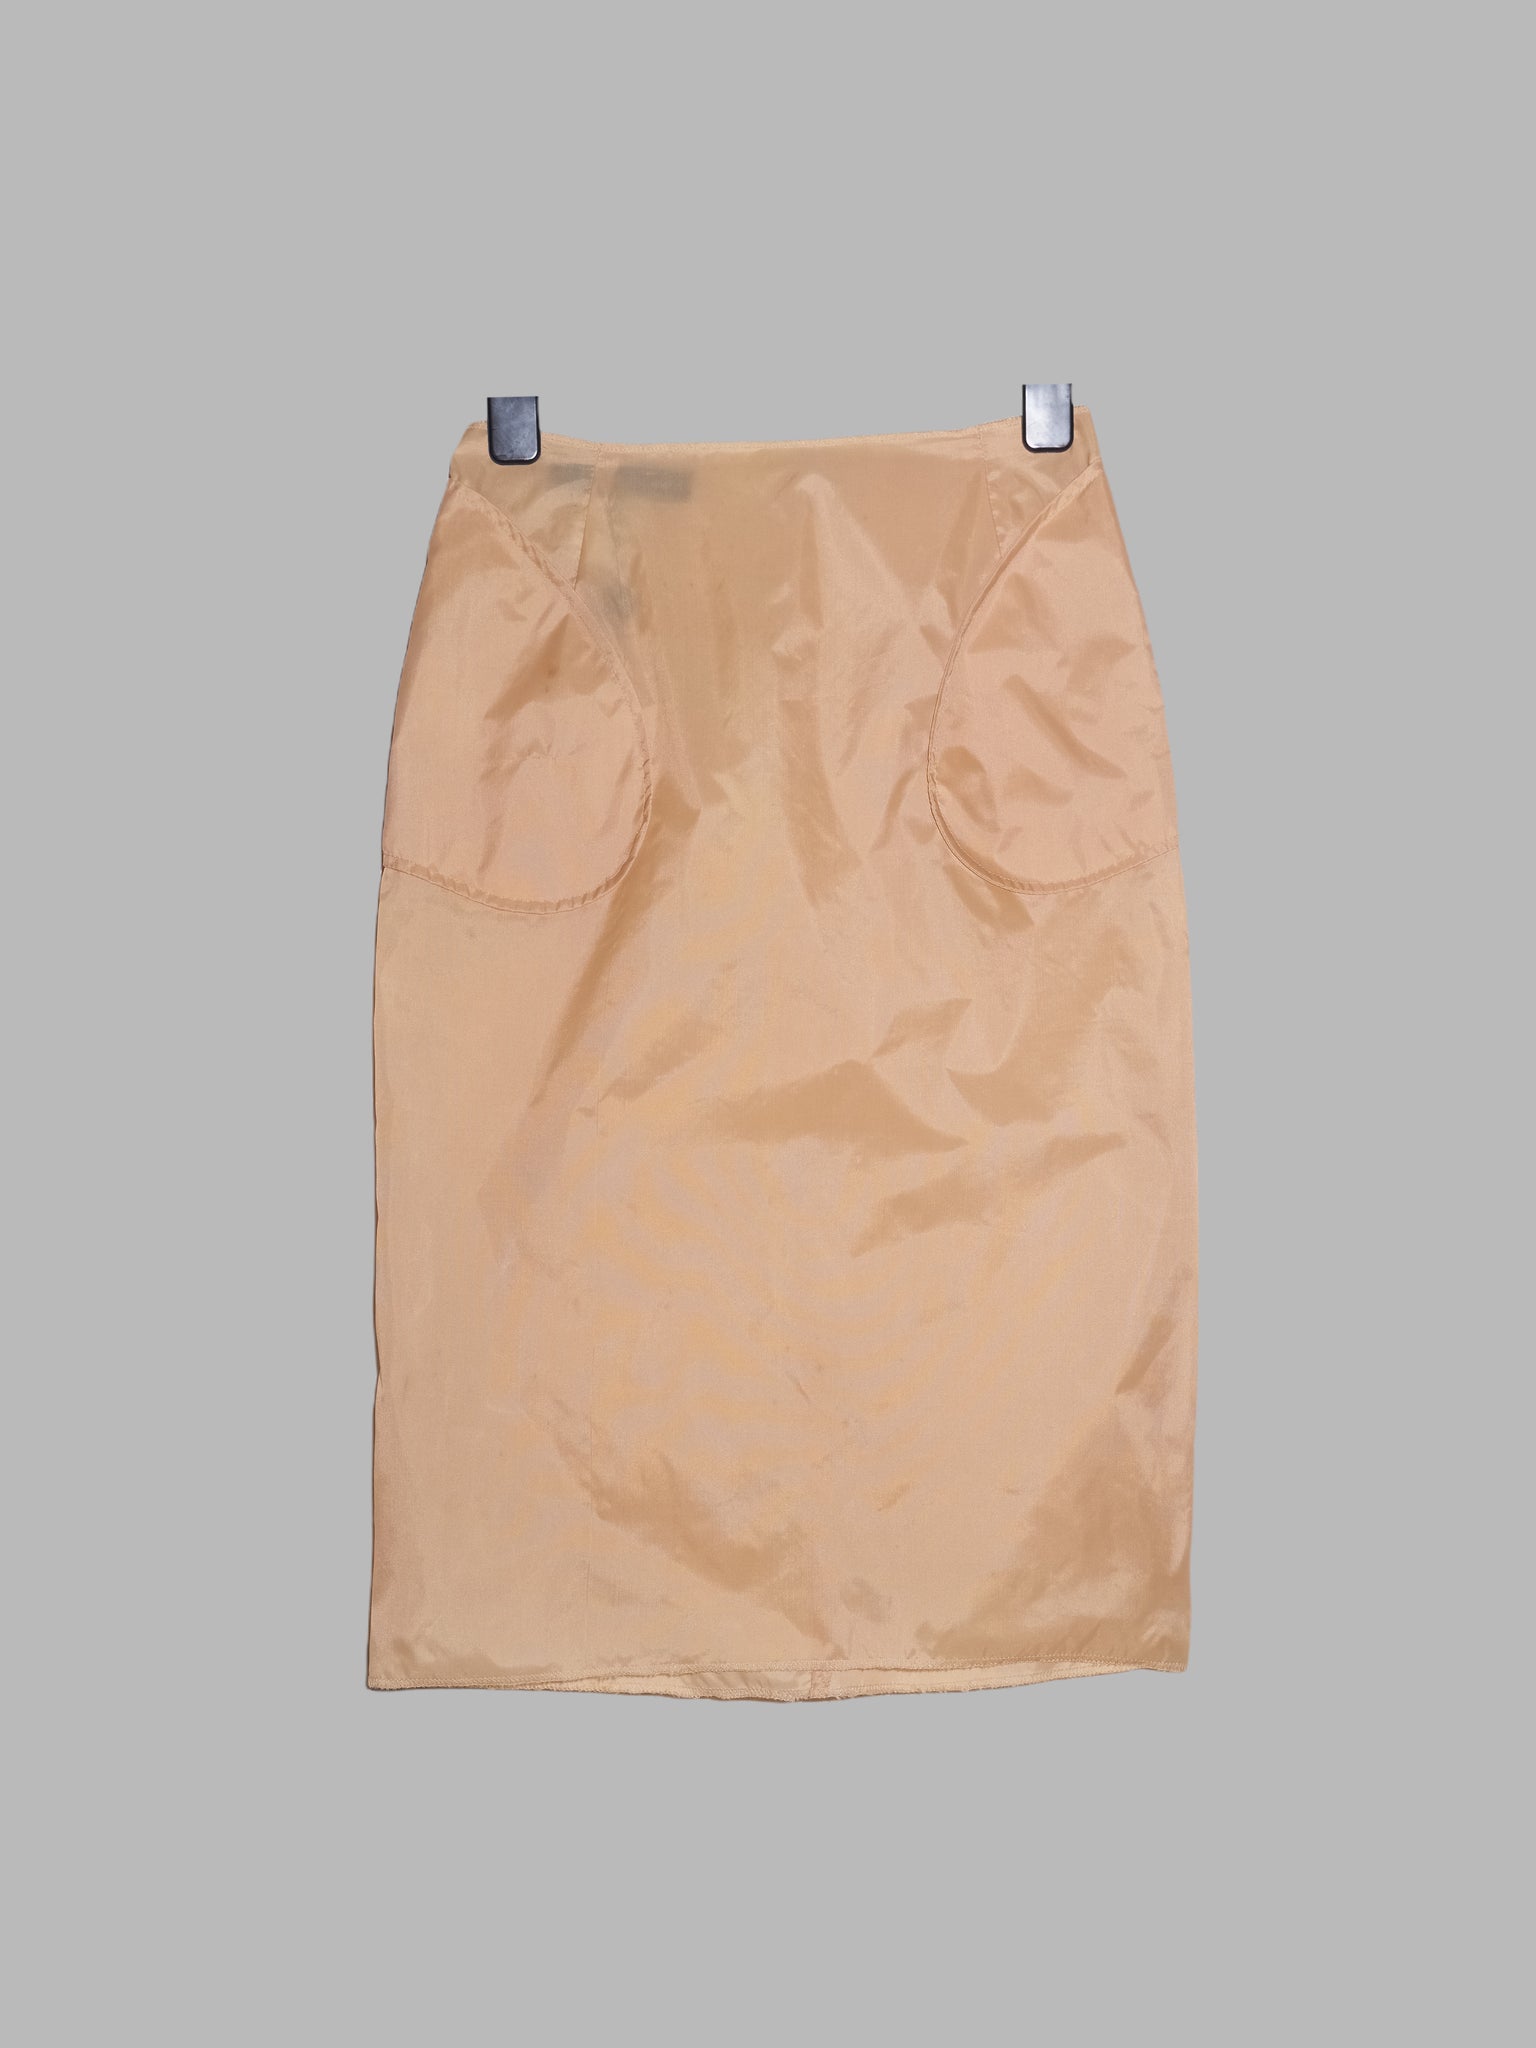 Jean Colonna beige nylon lining skirt with exterior pocket bags - size 38